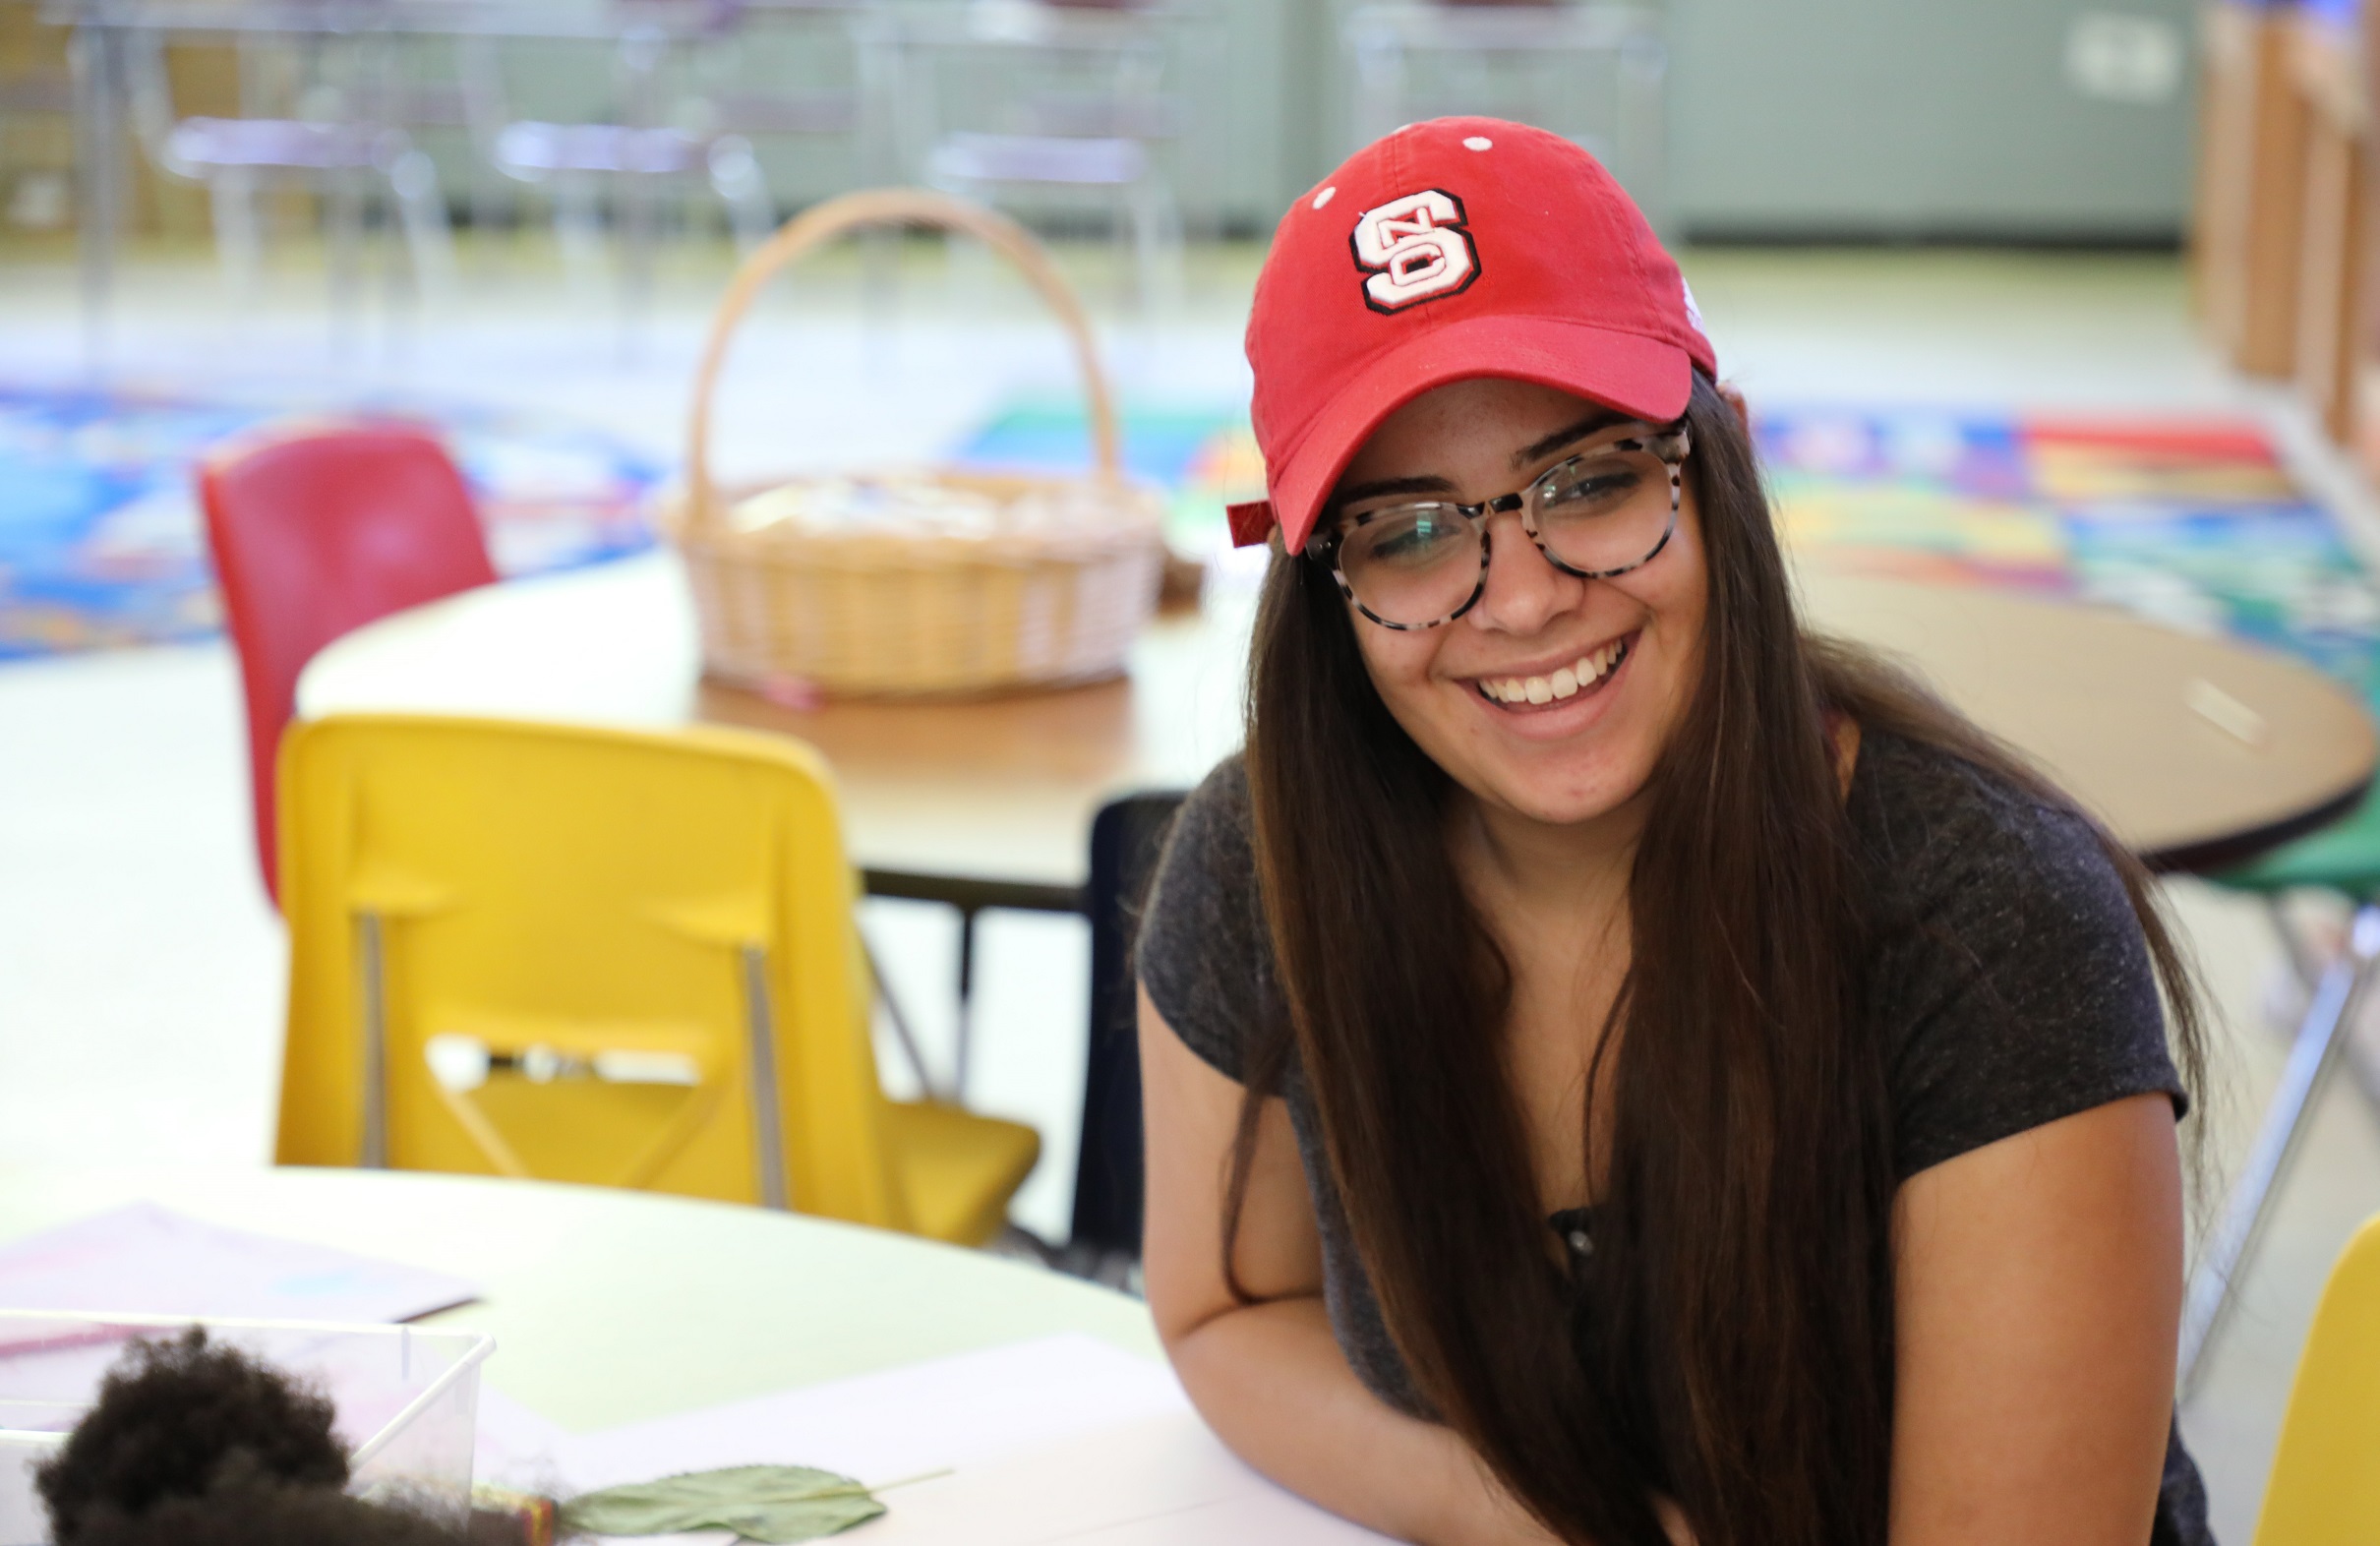 student with long hair and glasses and red hat smiling